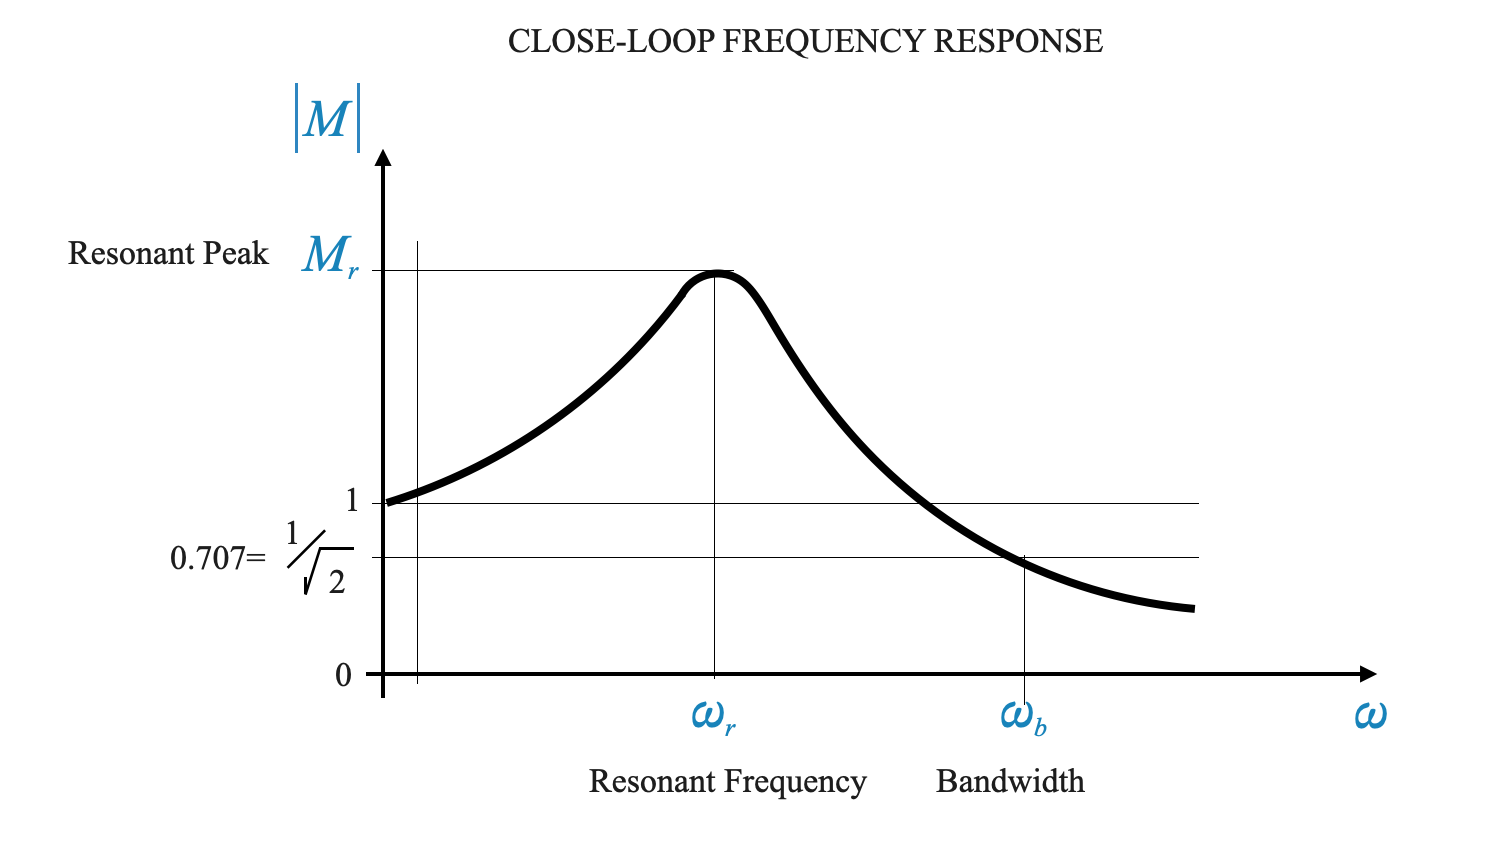 29_Feedback_system_performance_based_on_frequency_response_closed_loop_frequency_response